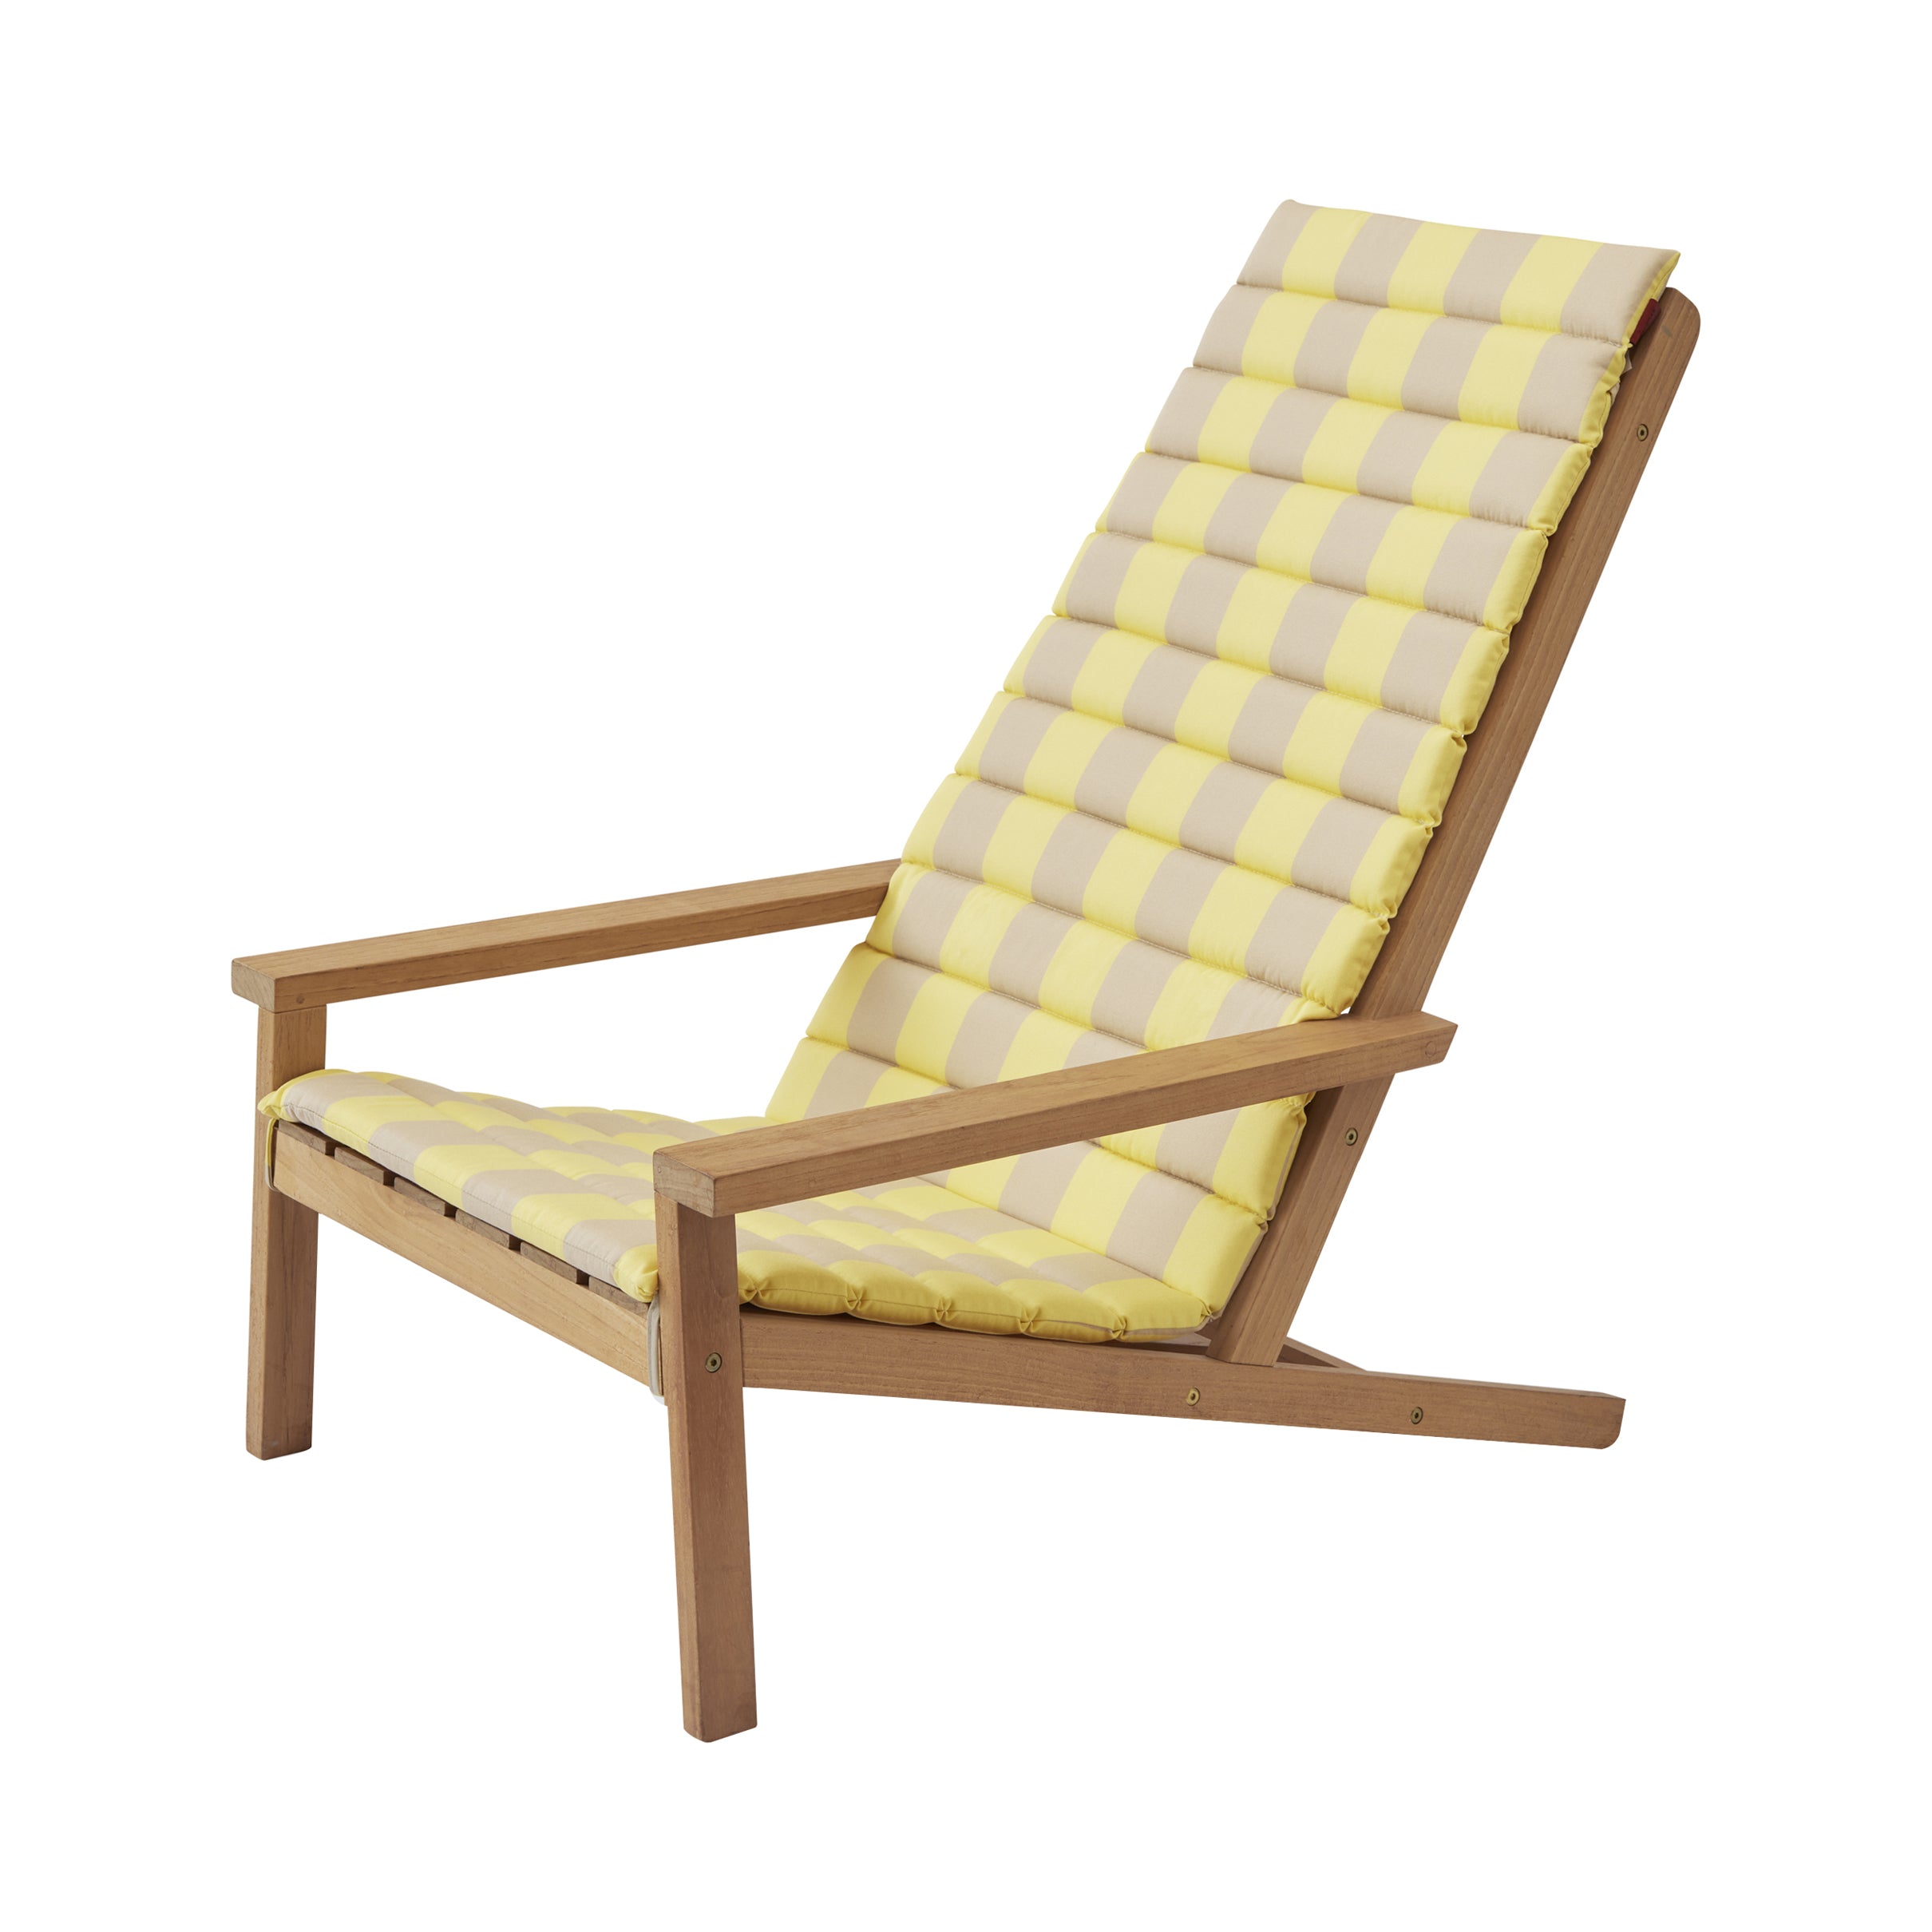 Between Lines Deck Chair: With Lemon + Sand Stripe Cushion